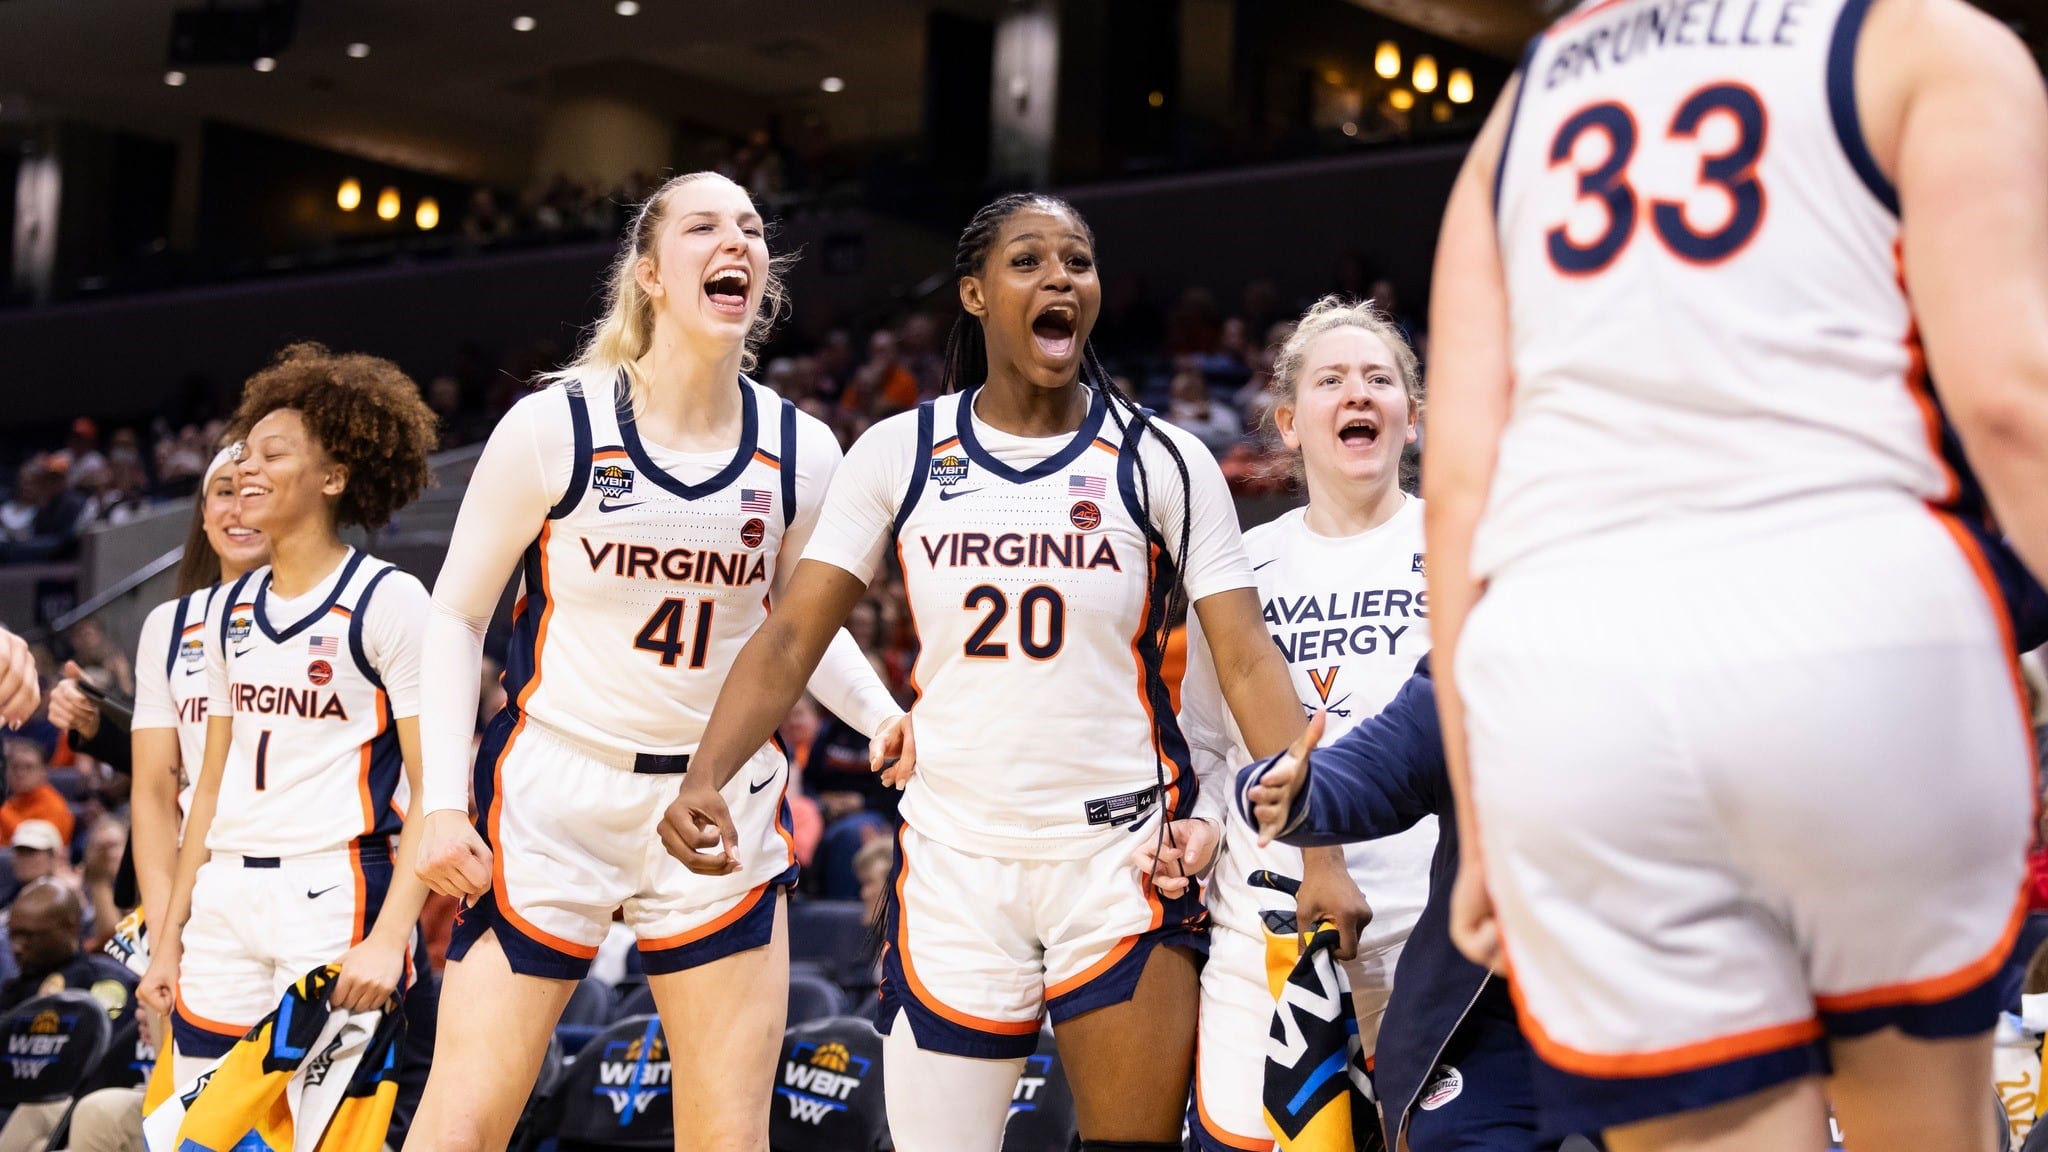 Virginia Women’s Basketball Season Review: Coach’s Impact, Star Players, Challenges & Successes